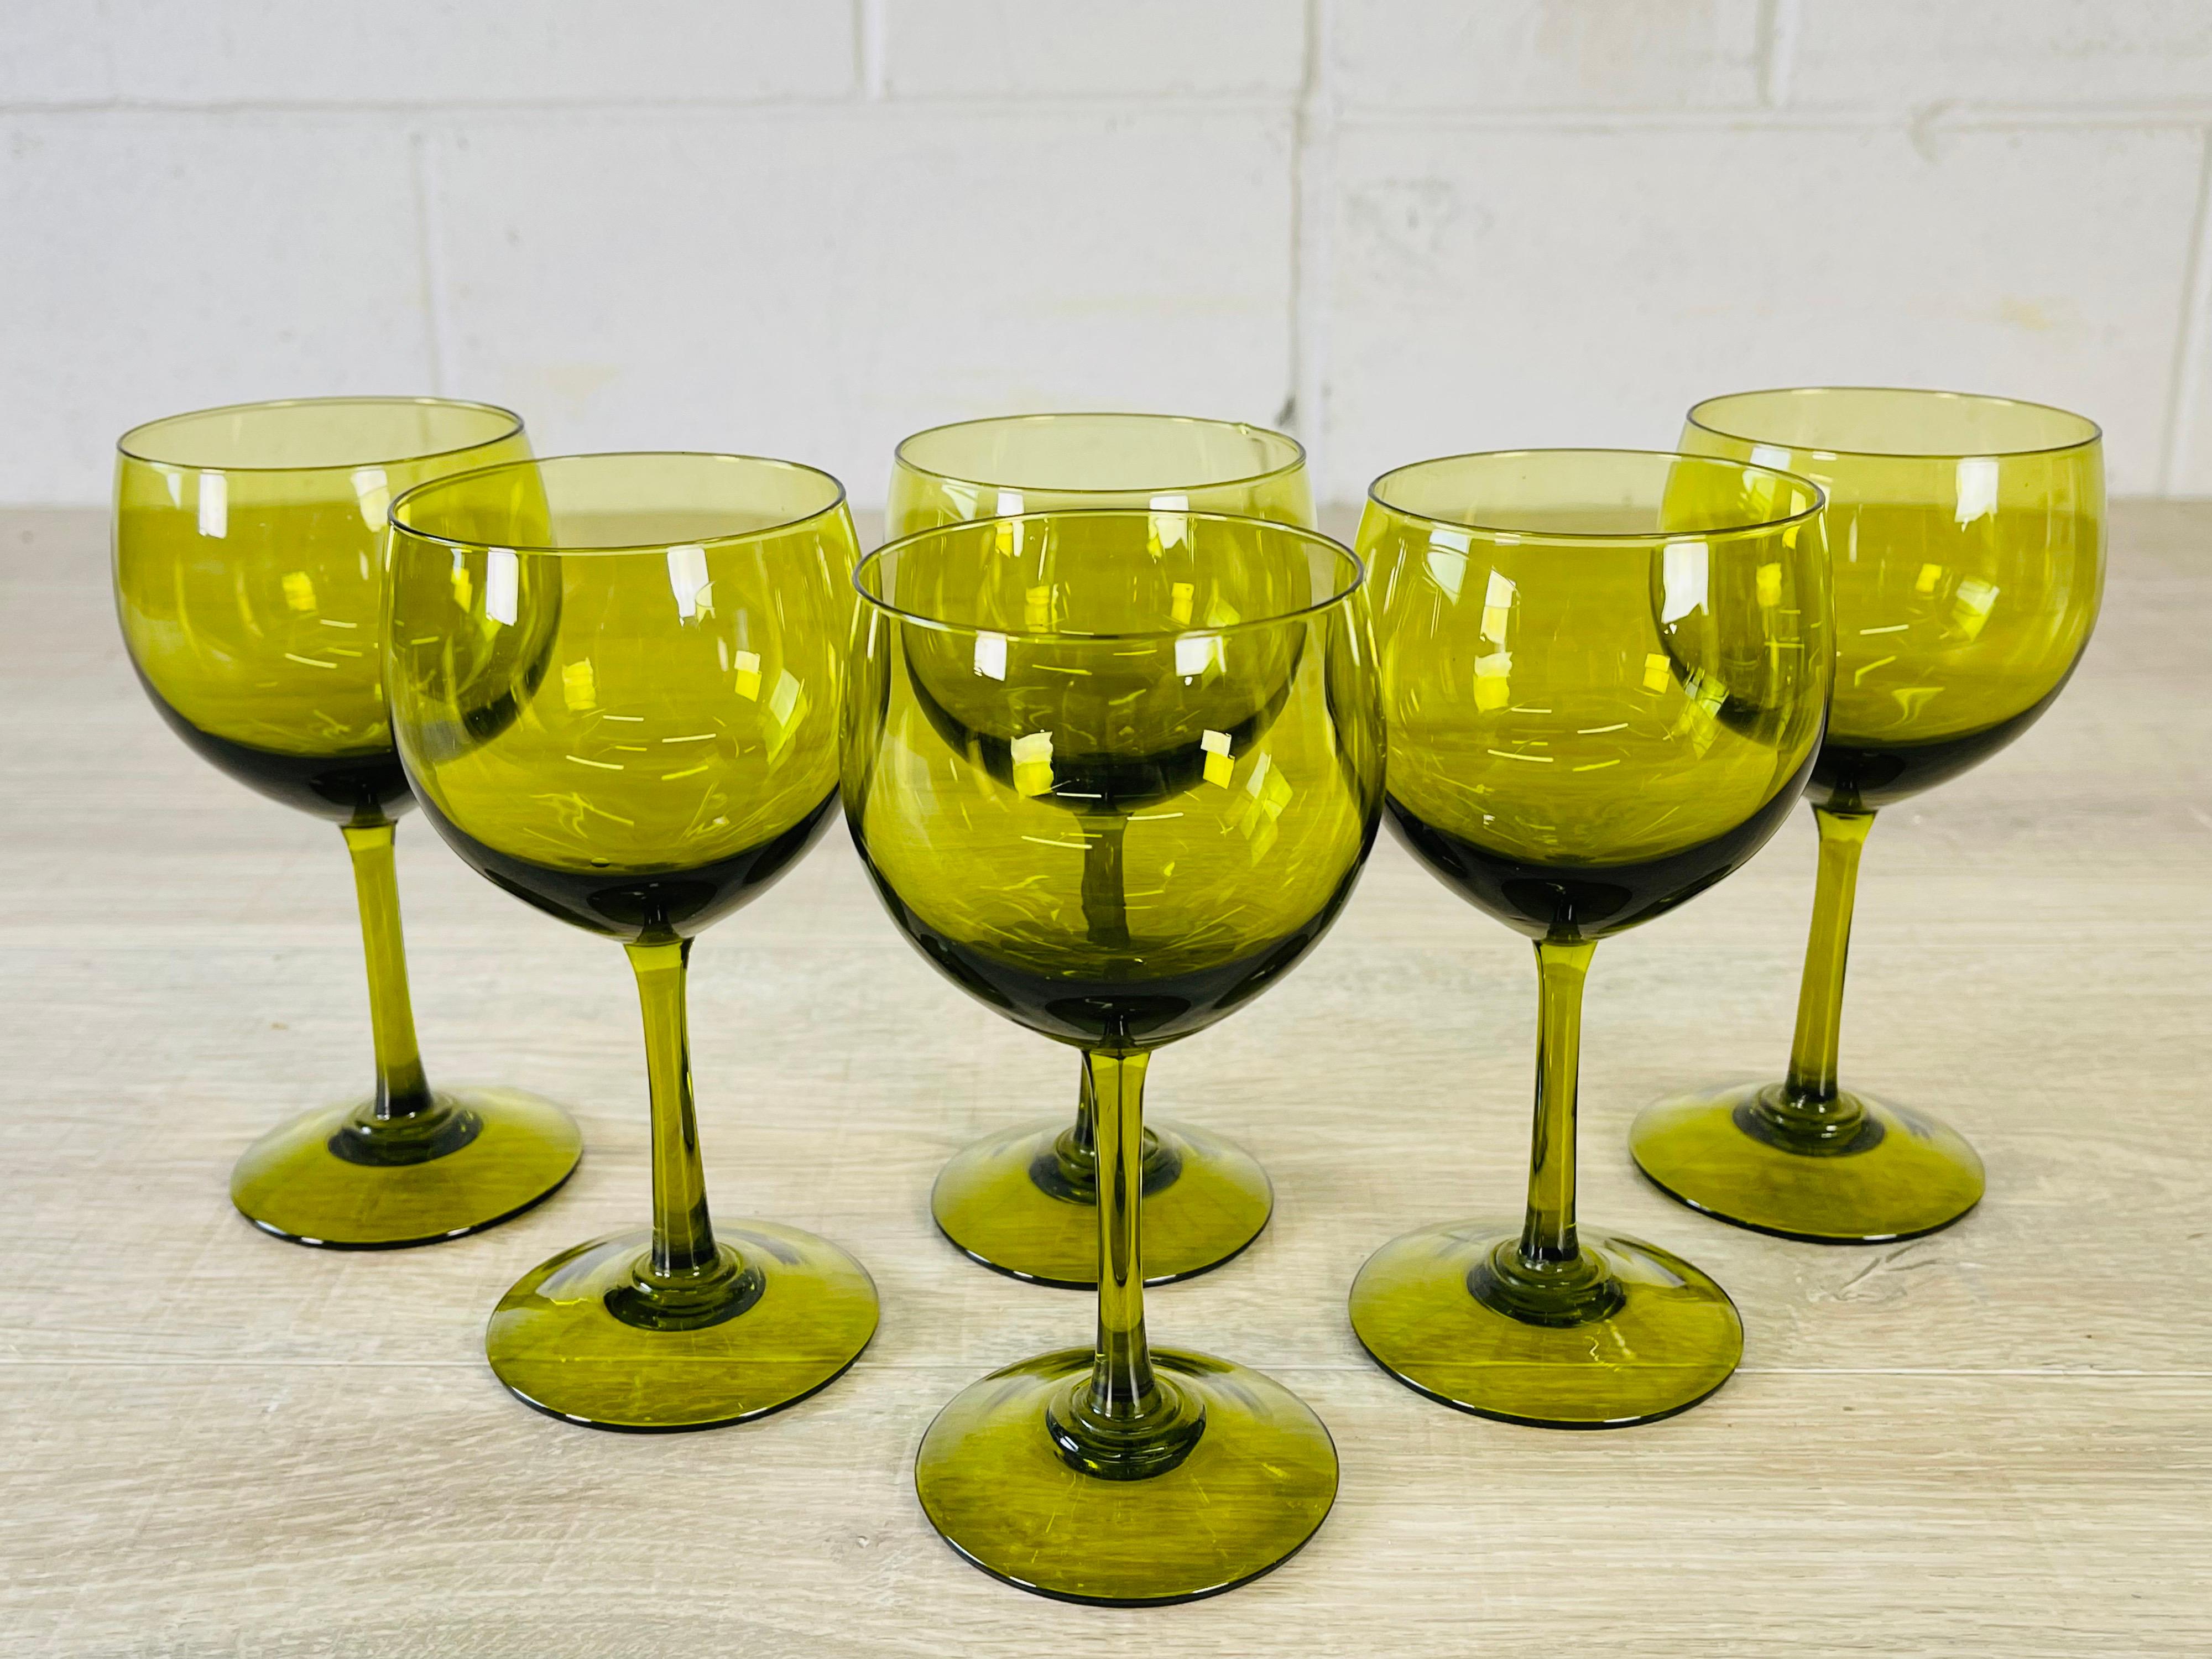 Vintage 1960s set of 6 smaller green glass wine stems. No marks.